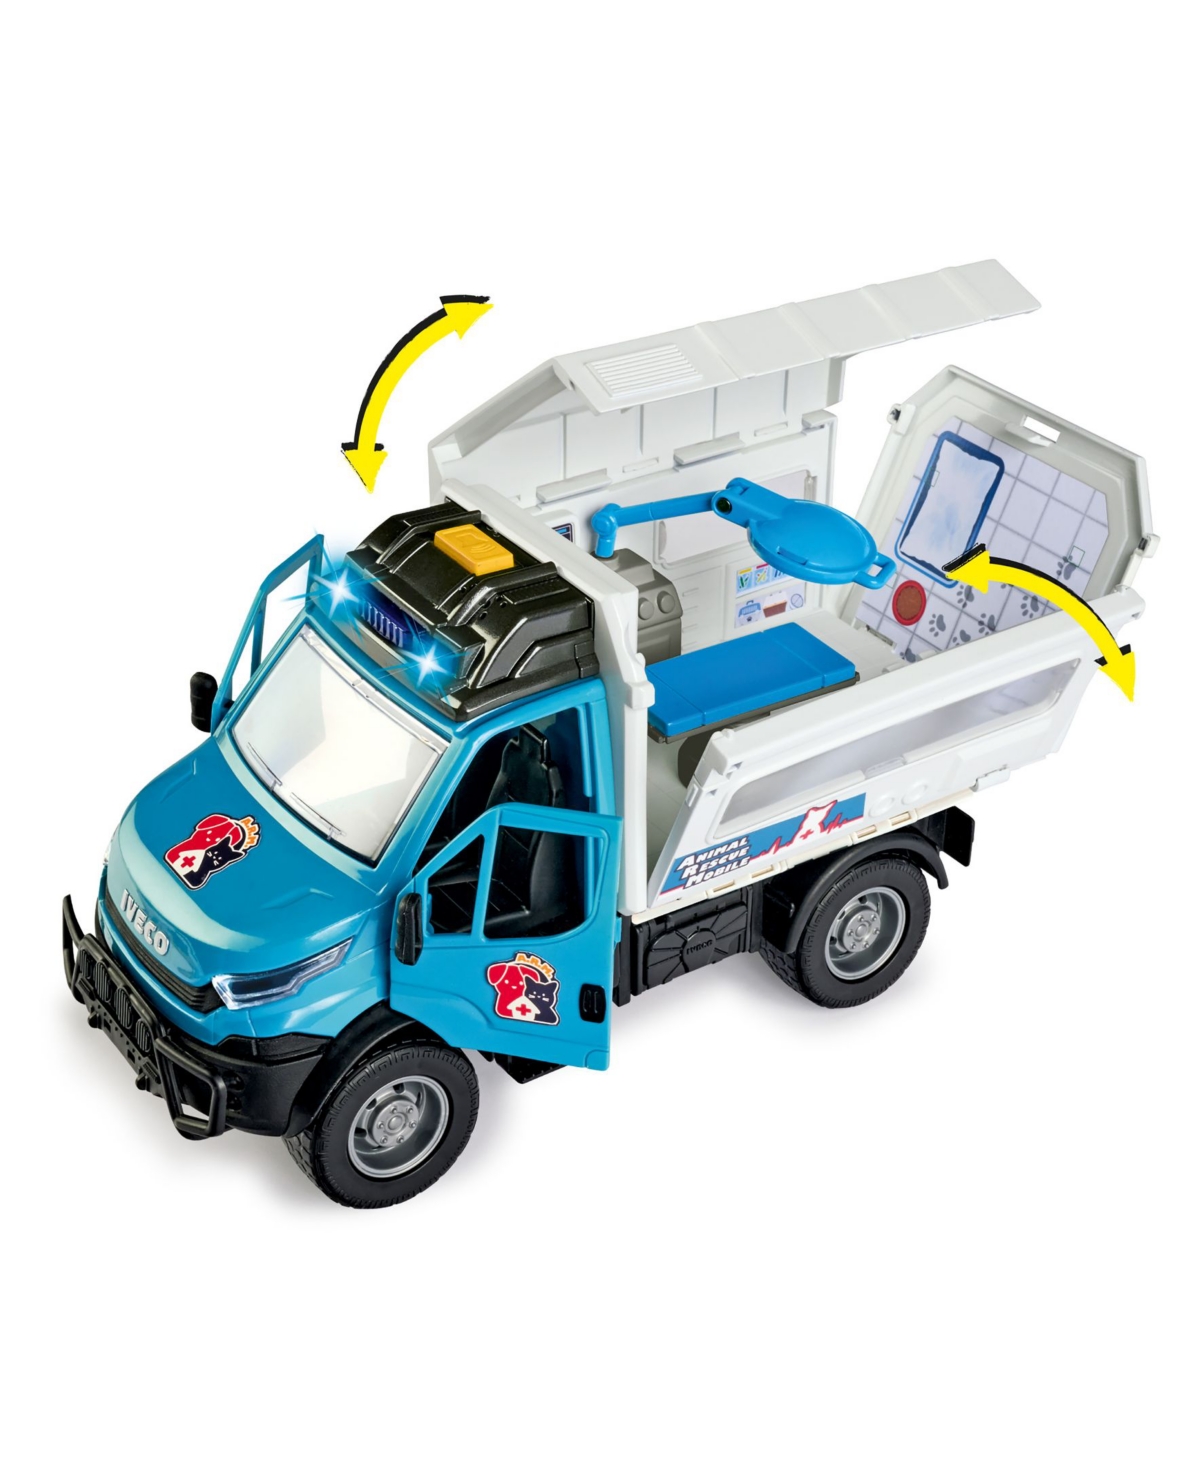 Shop Dickie Toys Hk Ltd - Light Sound Iveco Animal Rescue Playset In Multi